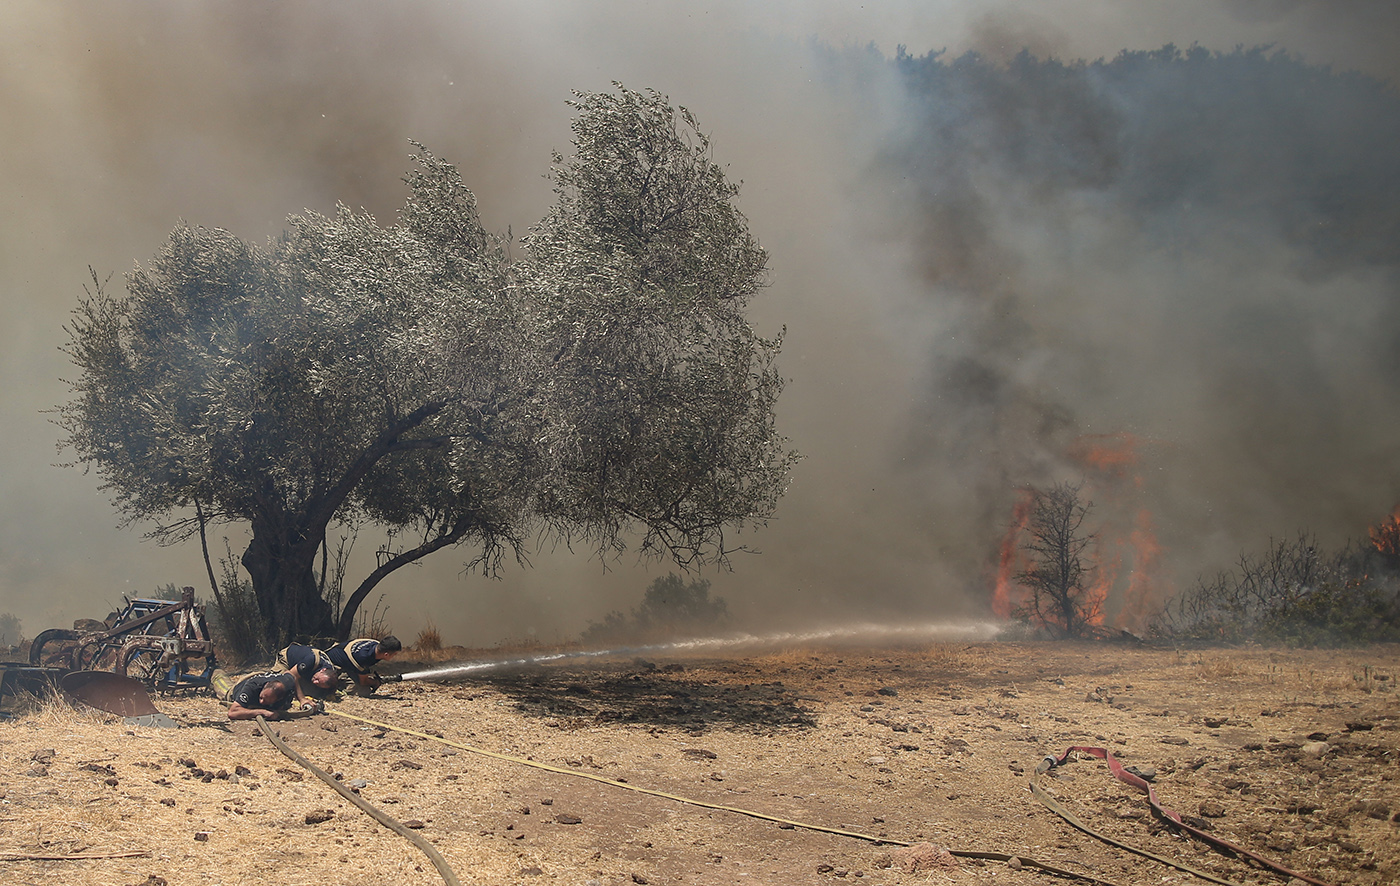 Members of Istanbul Fire Department fight with the wildfire burning at the Cokertme village of Milas district of Mugla, Turkey, 02 August 2021. Turkish Health minister Fahrettin Koca confirmed that eight people have lost their lives due to the wildfires raging in Turkey’s Mediterranean towns.